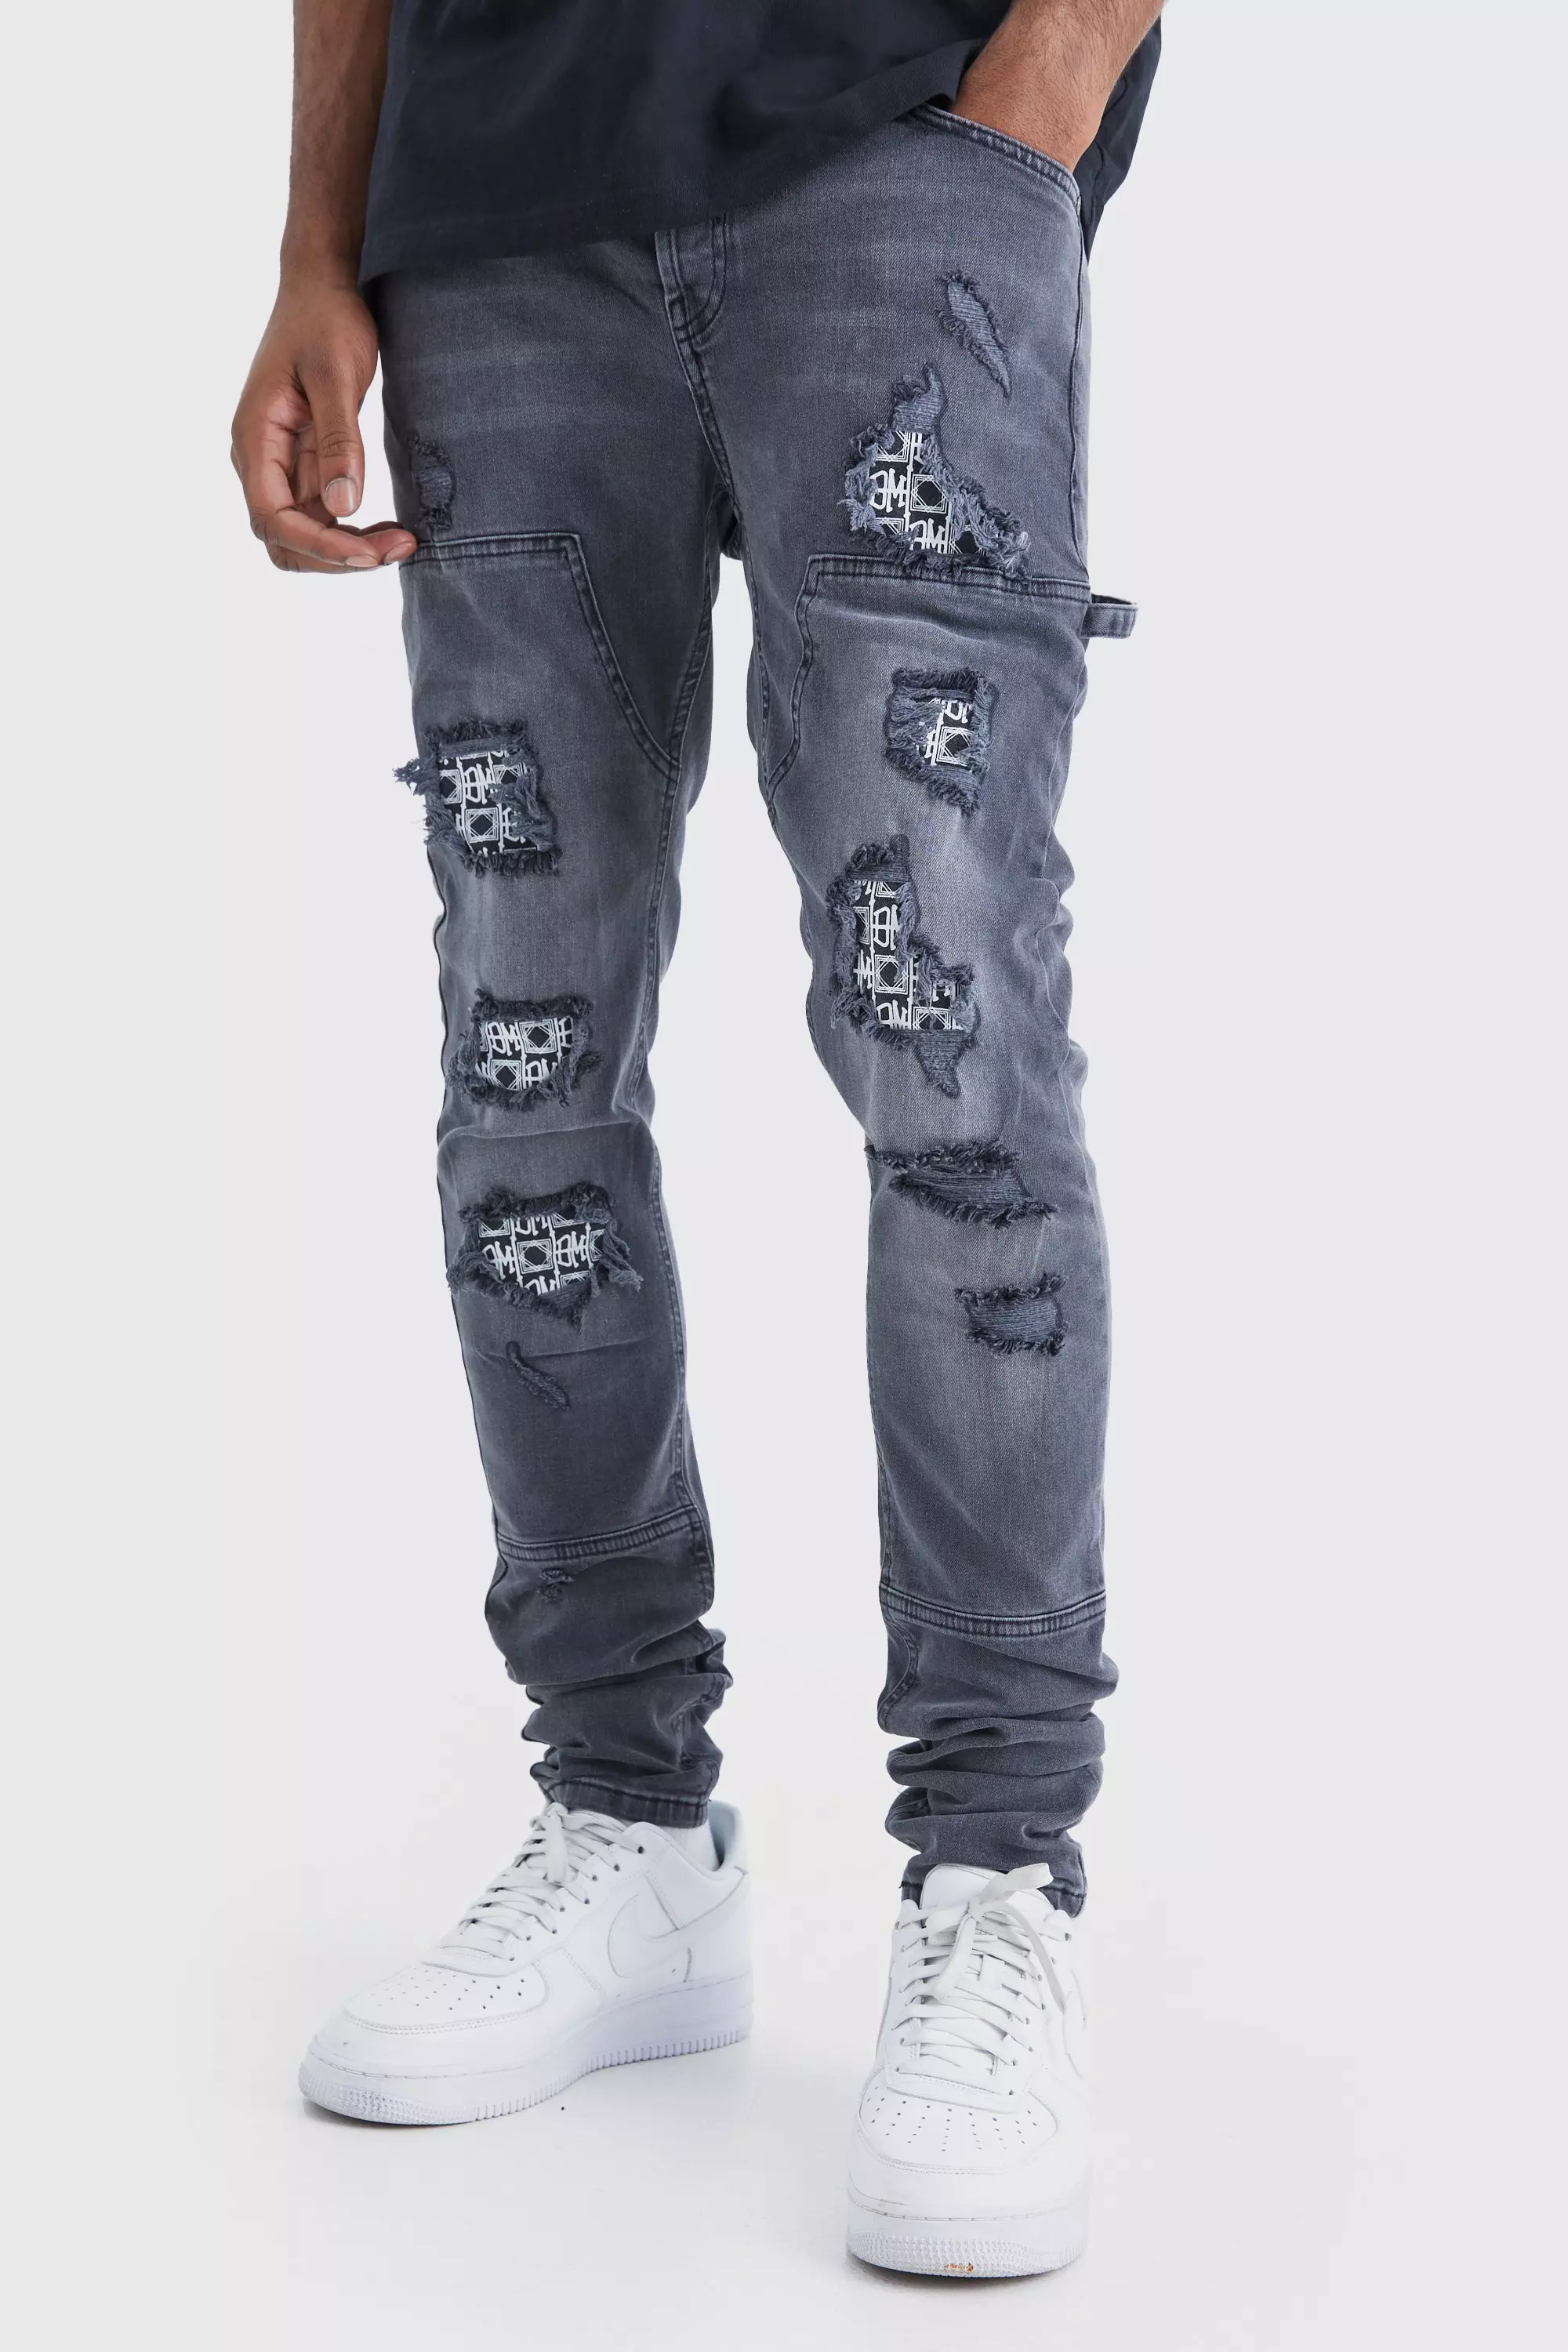 Men's Tall Ripped Jeans